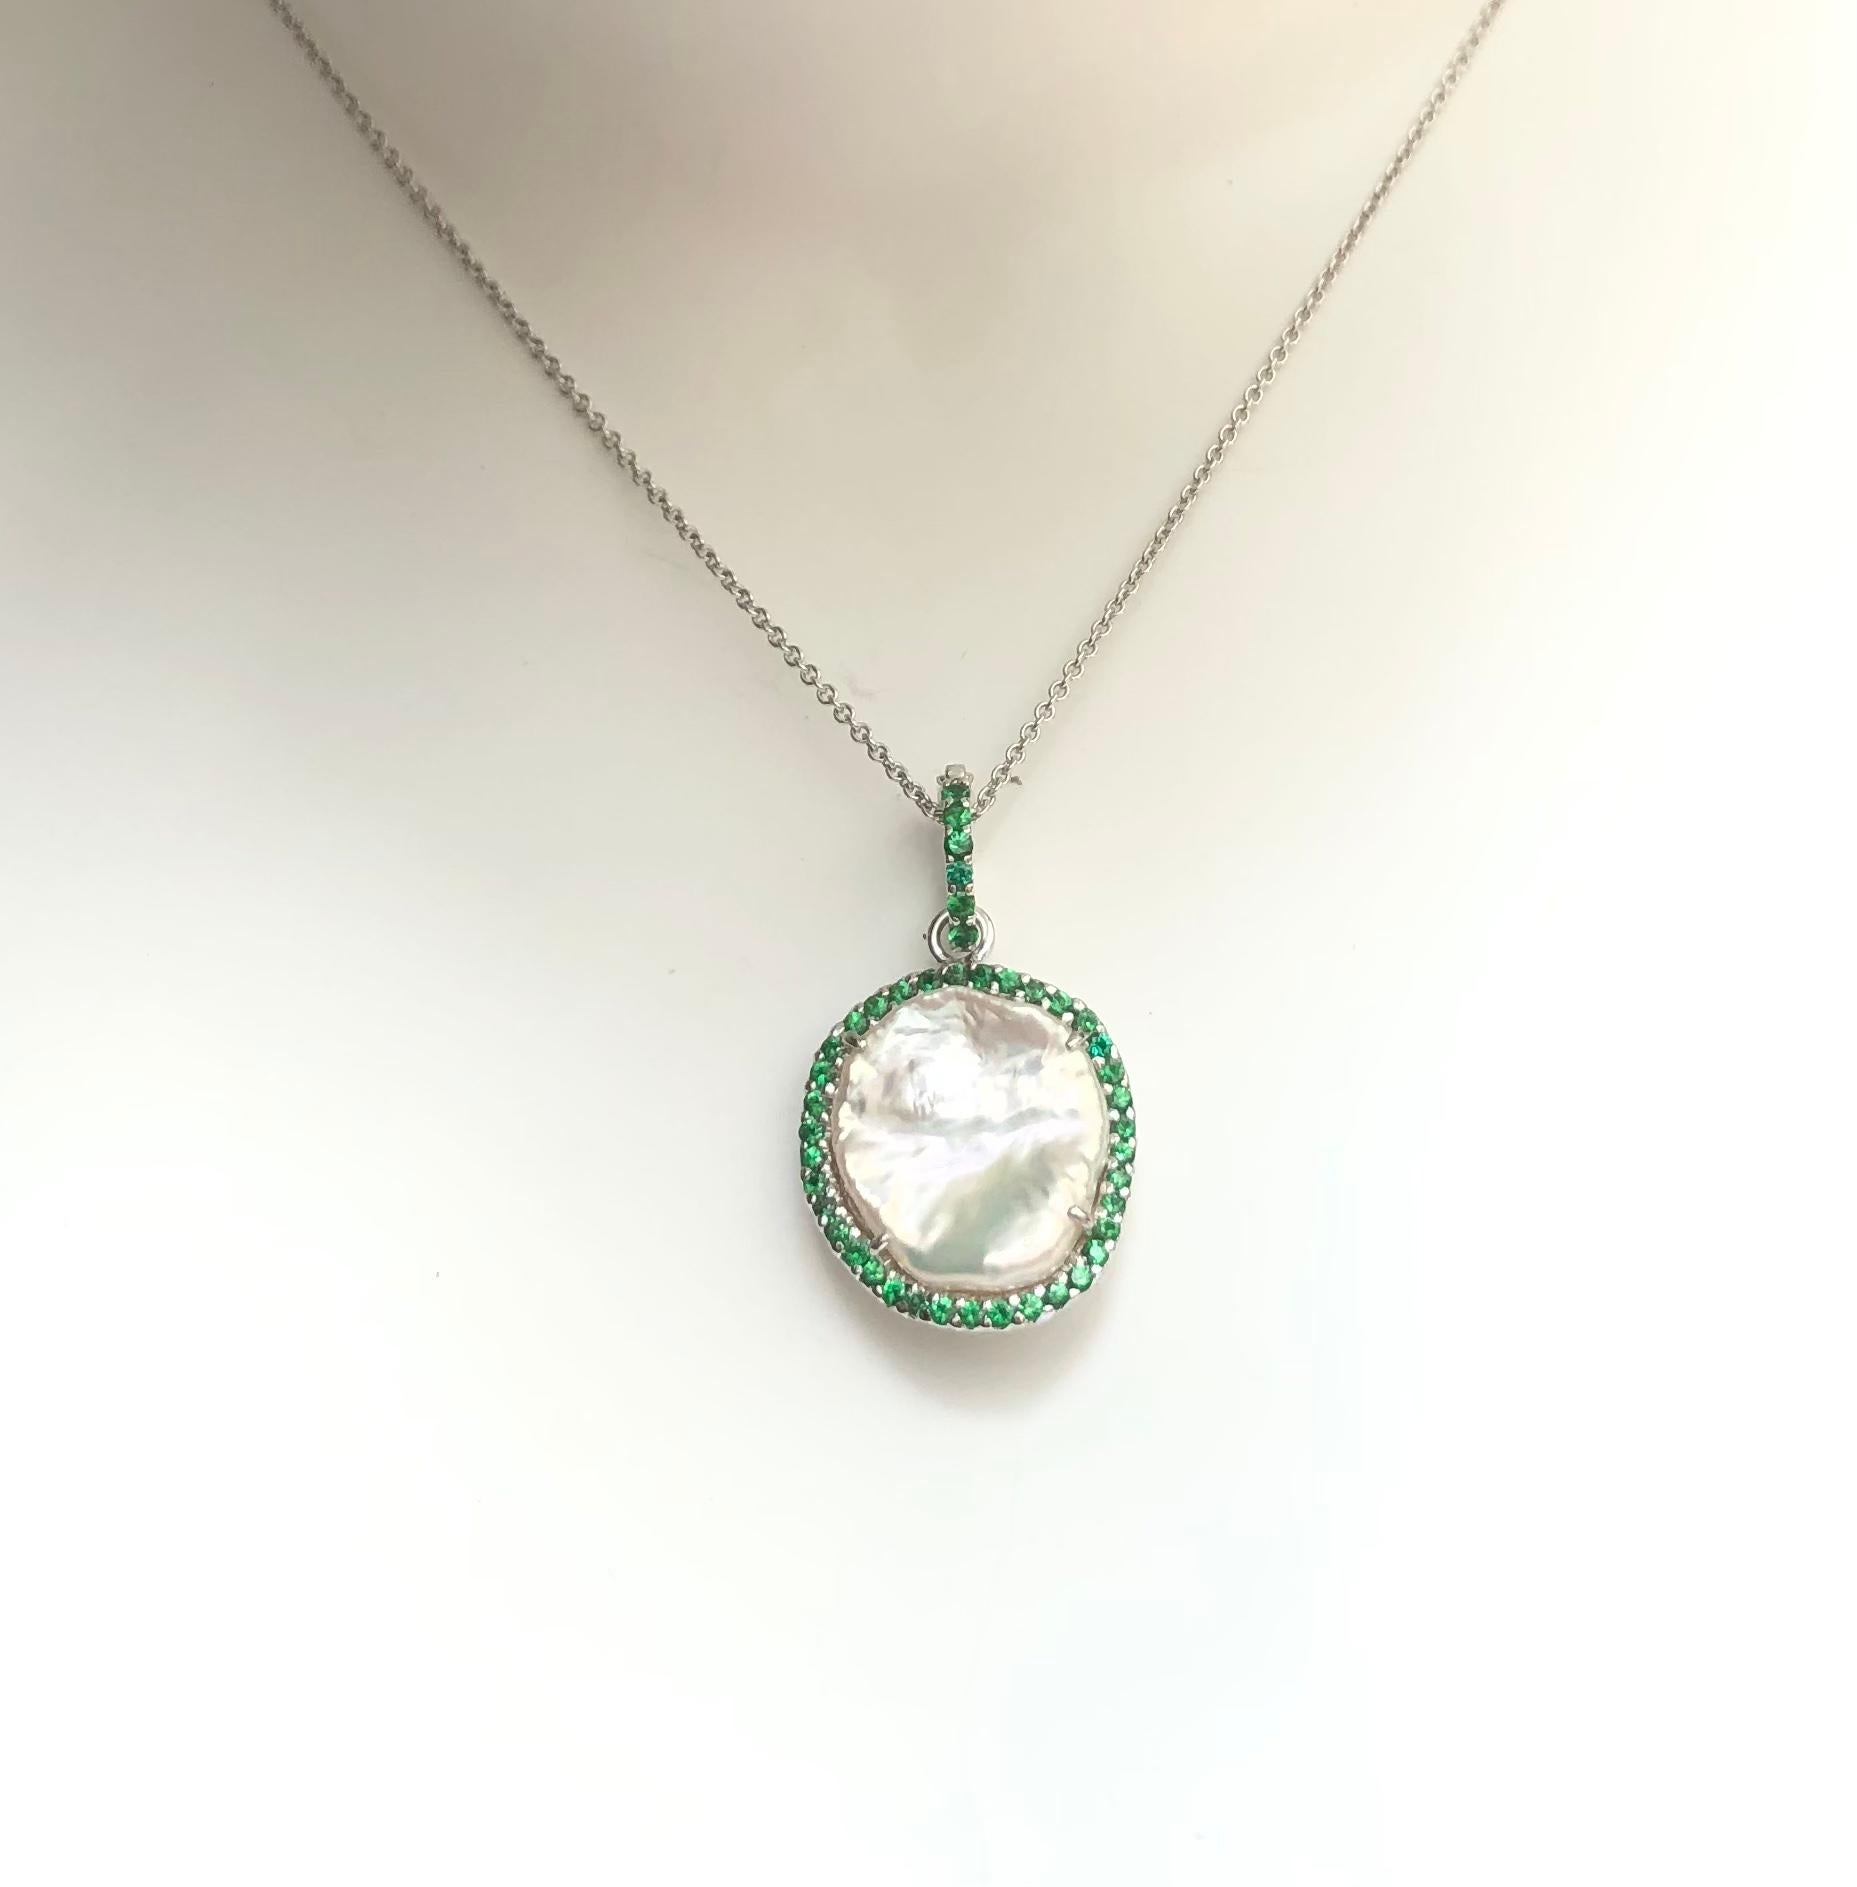 Fresh Water Pearl with Tsavorite 0.75 carat Pendant set in 18 Karat White Gold Settings
(chain not included)

Width:  1.9 cm 
Length: 3.1 cm
Total Weight: 5.84 grams

